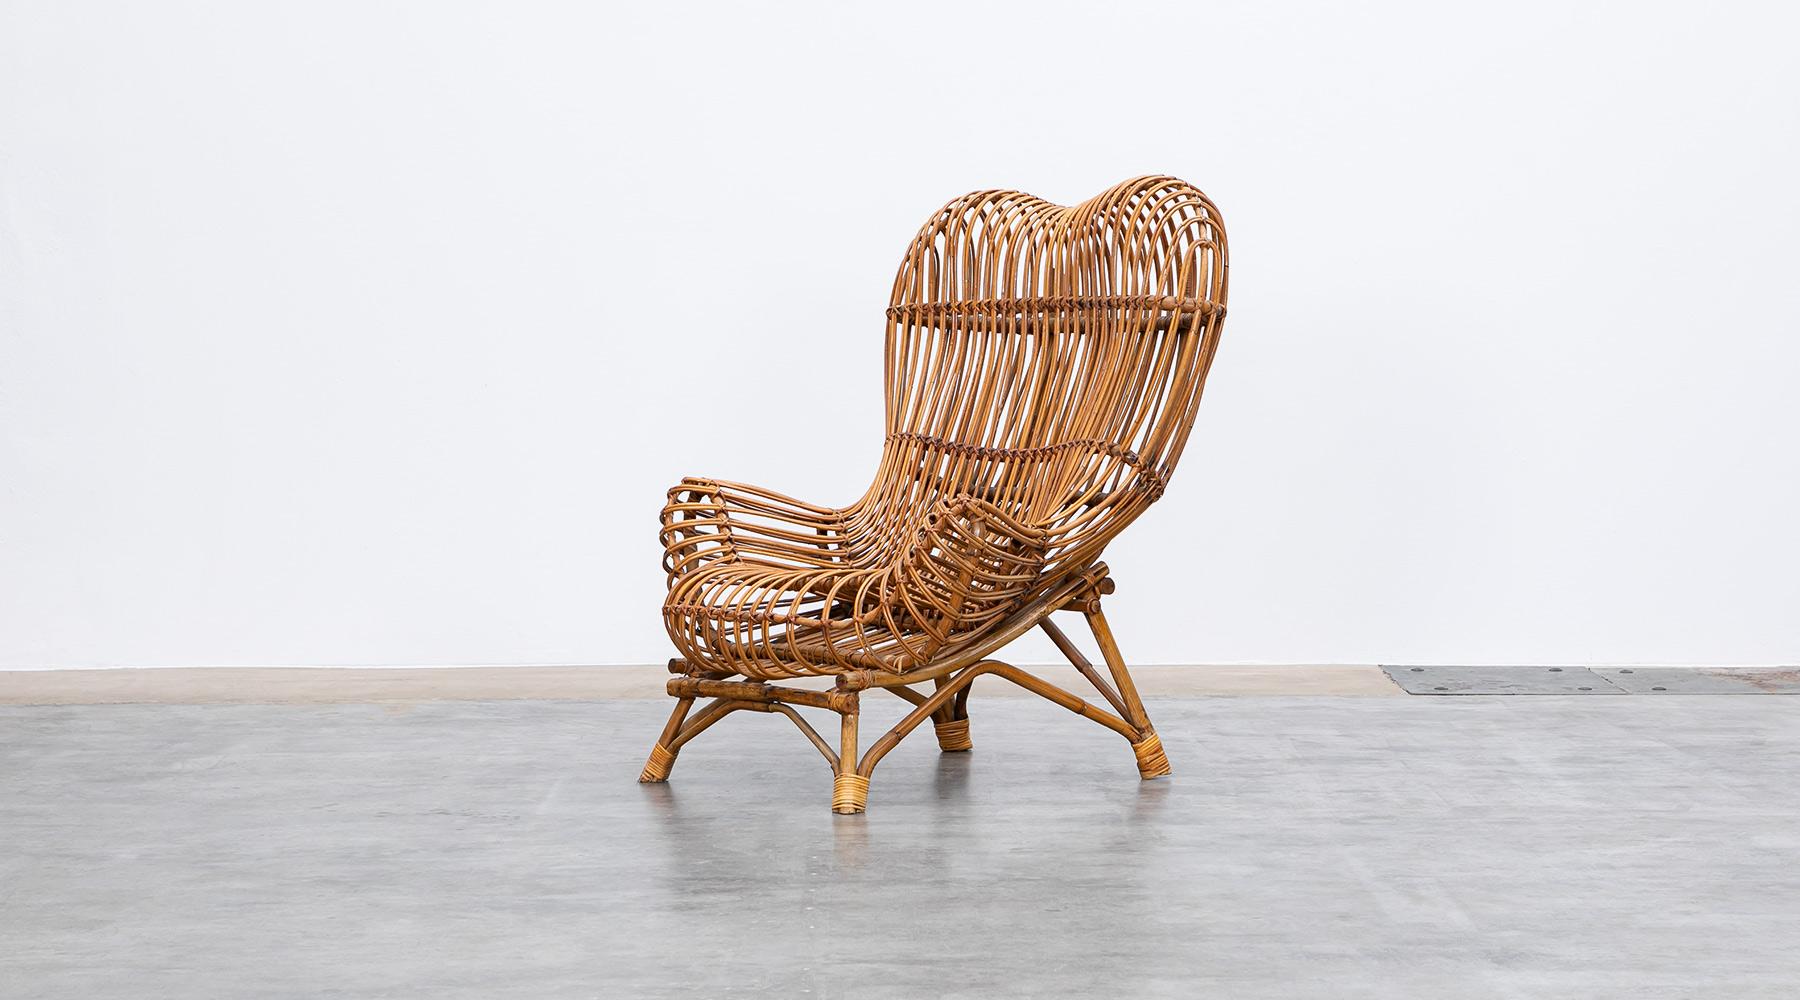 Lounge chair, brown basketwork by Franco Albini, Italy, 1950.

Wonderful lounge chair by Franco Albini in high-quality wicker comes in very good original condition.

Franco Albini comes up with his most popular designs, among them shelves and